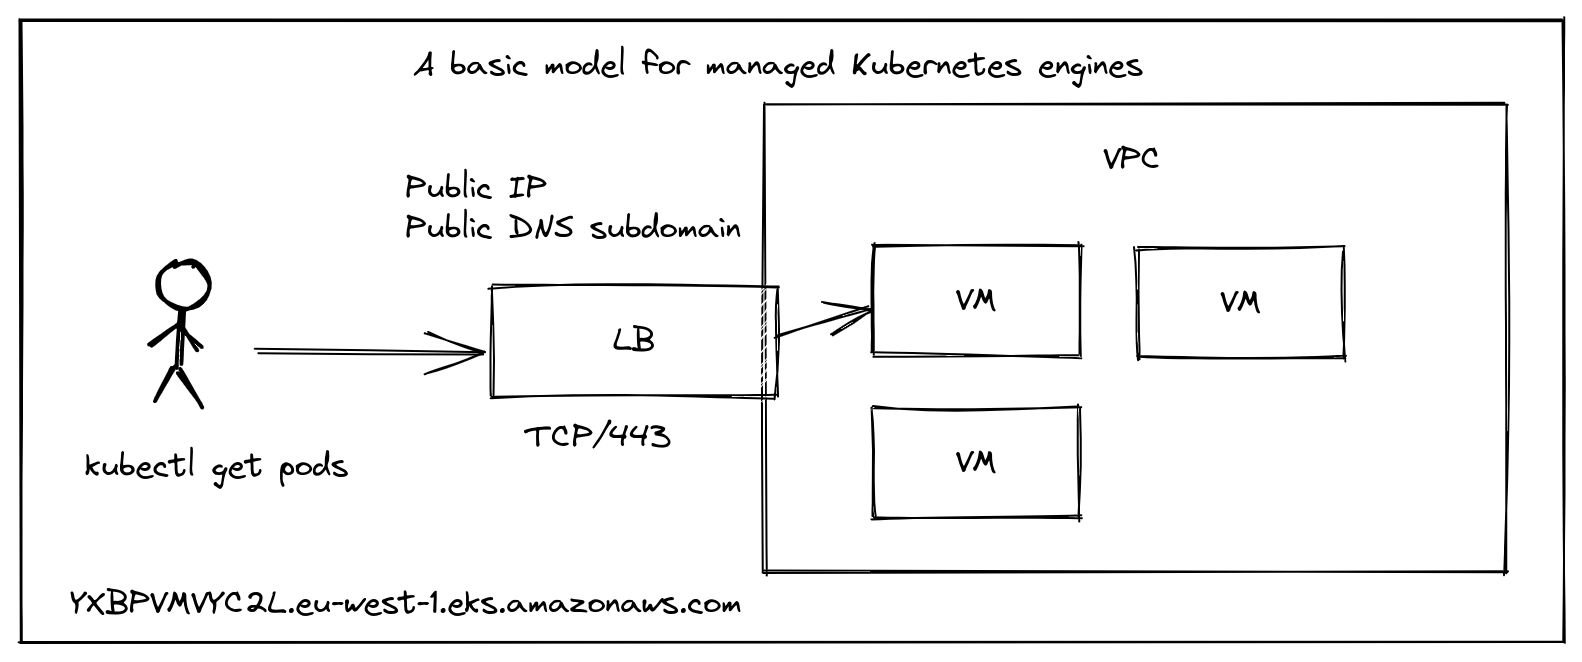 Conceptual diagram of a managed Kubernetes service